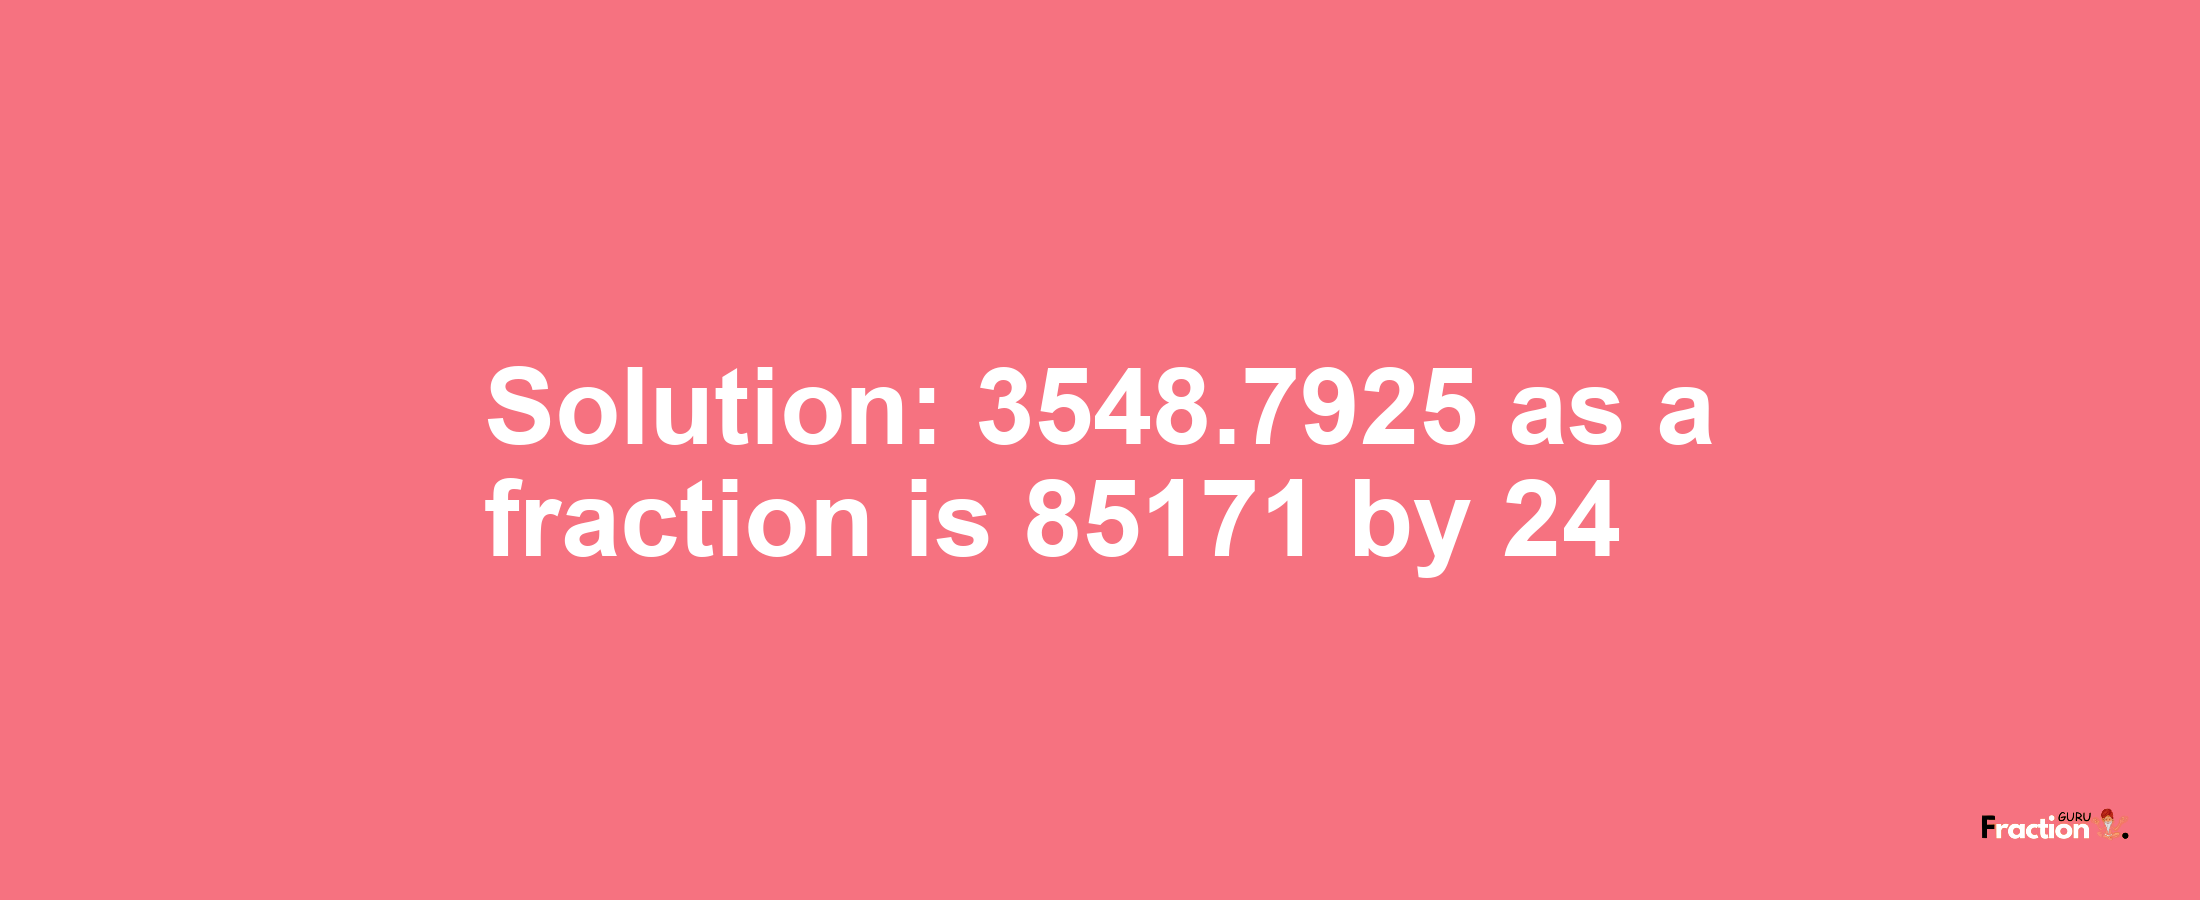 Solution:3548.7925 as a fraction is 85171/24